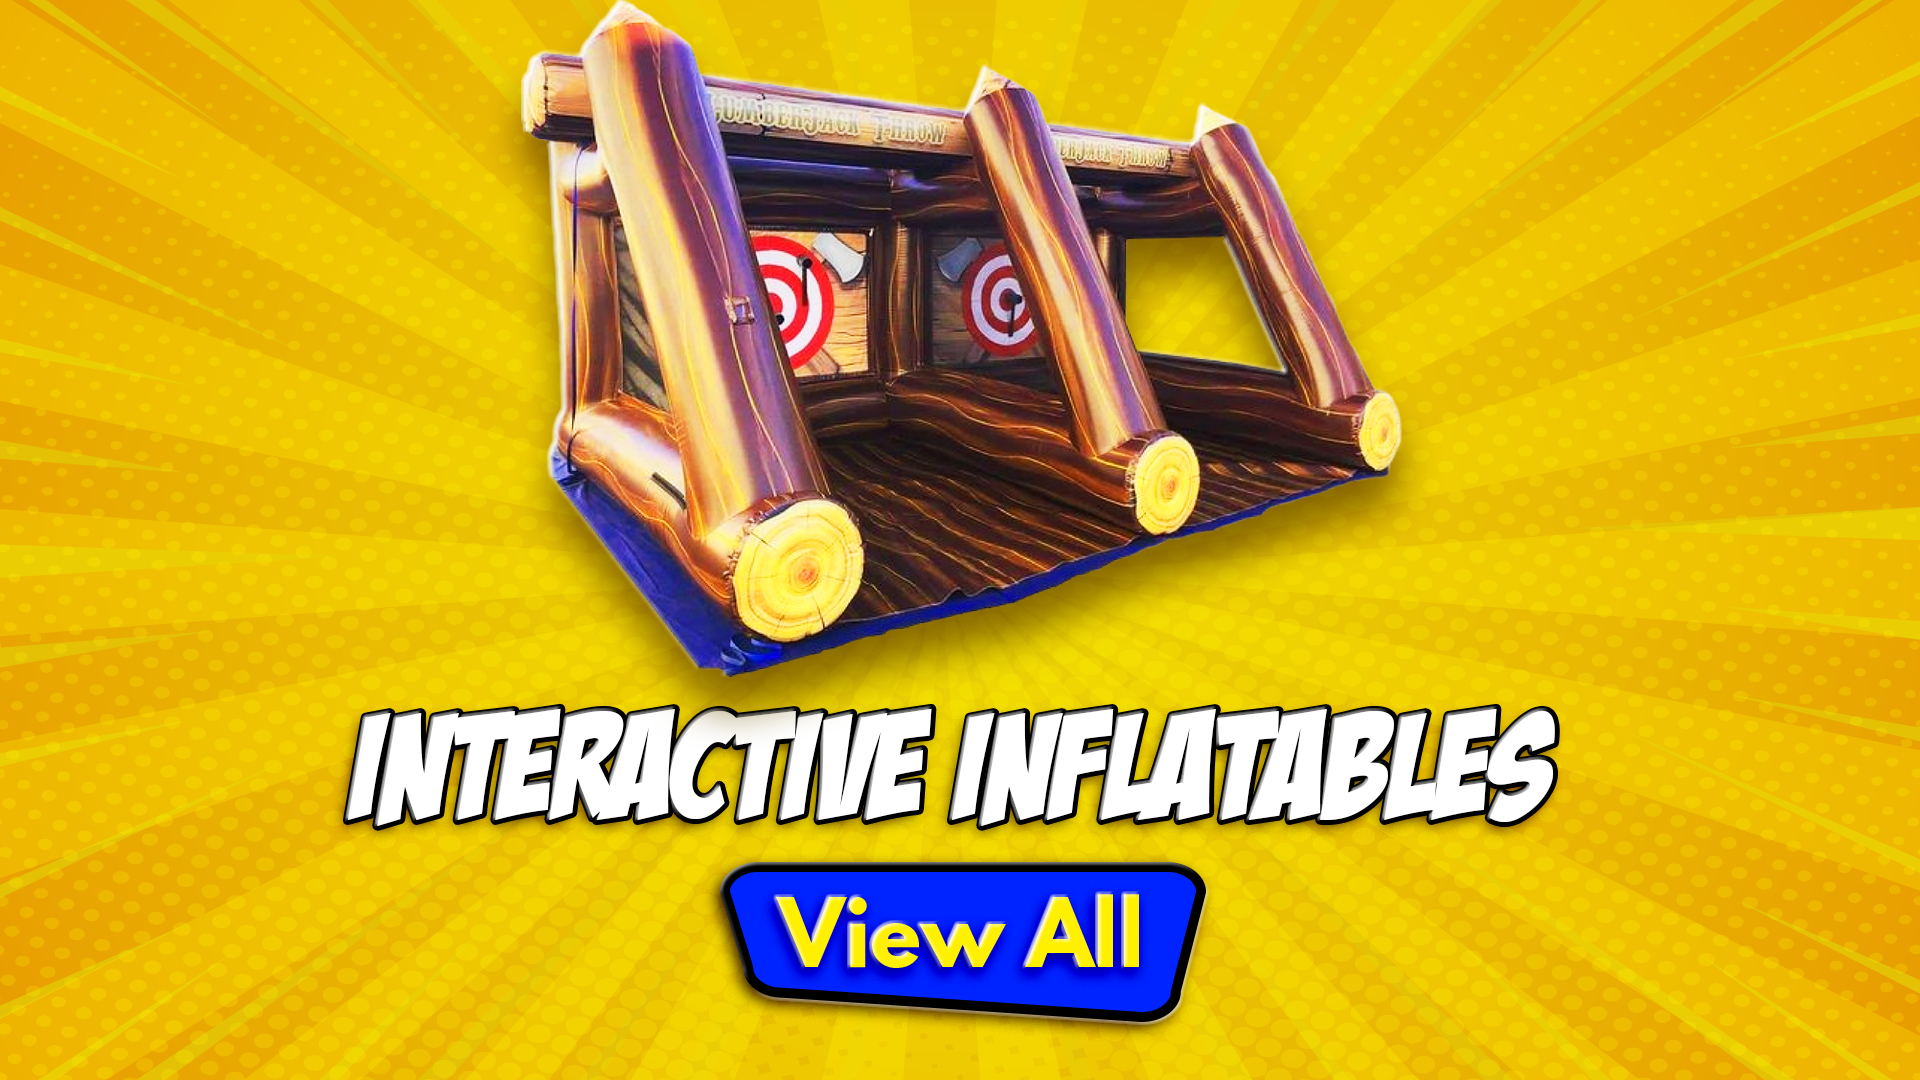 Castro Valley Interactive Inflatables